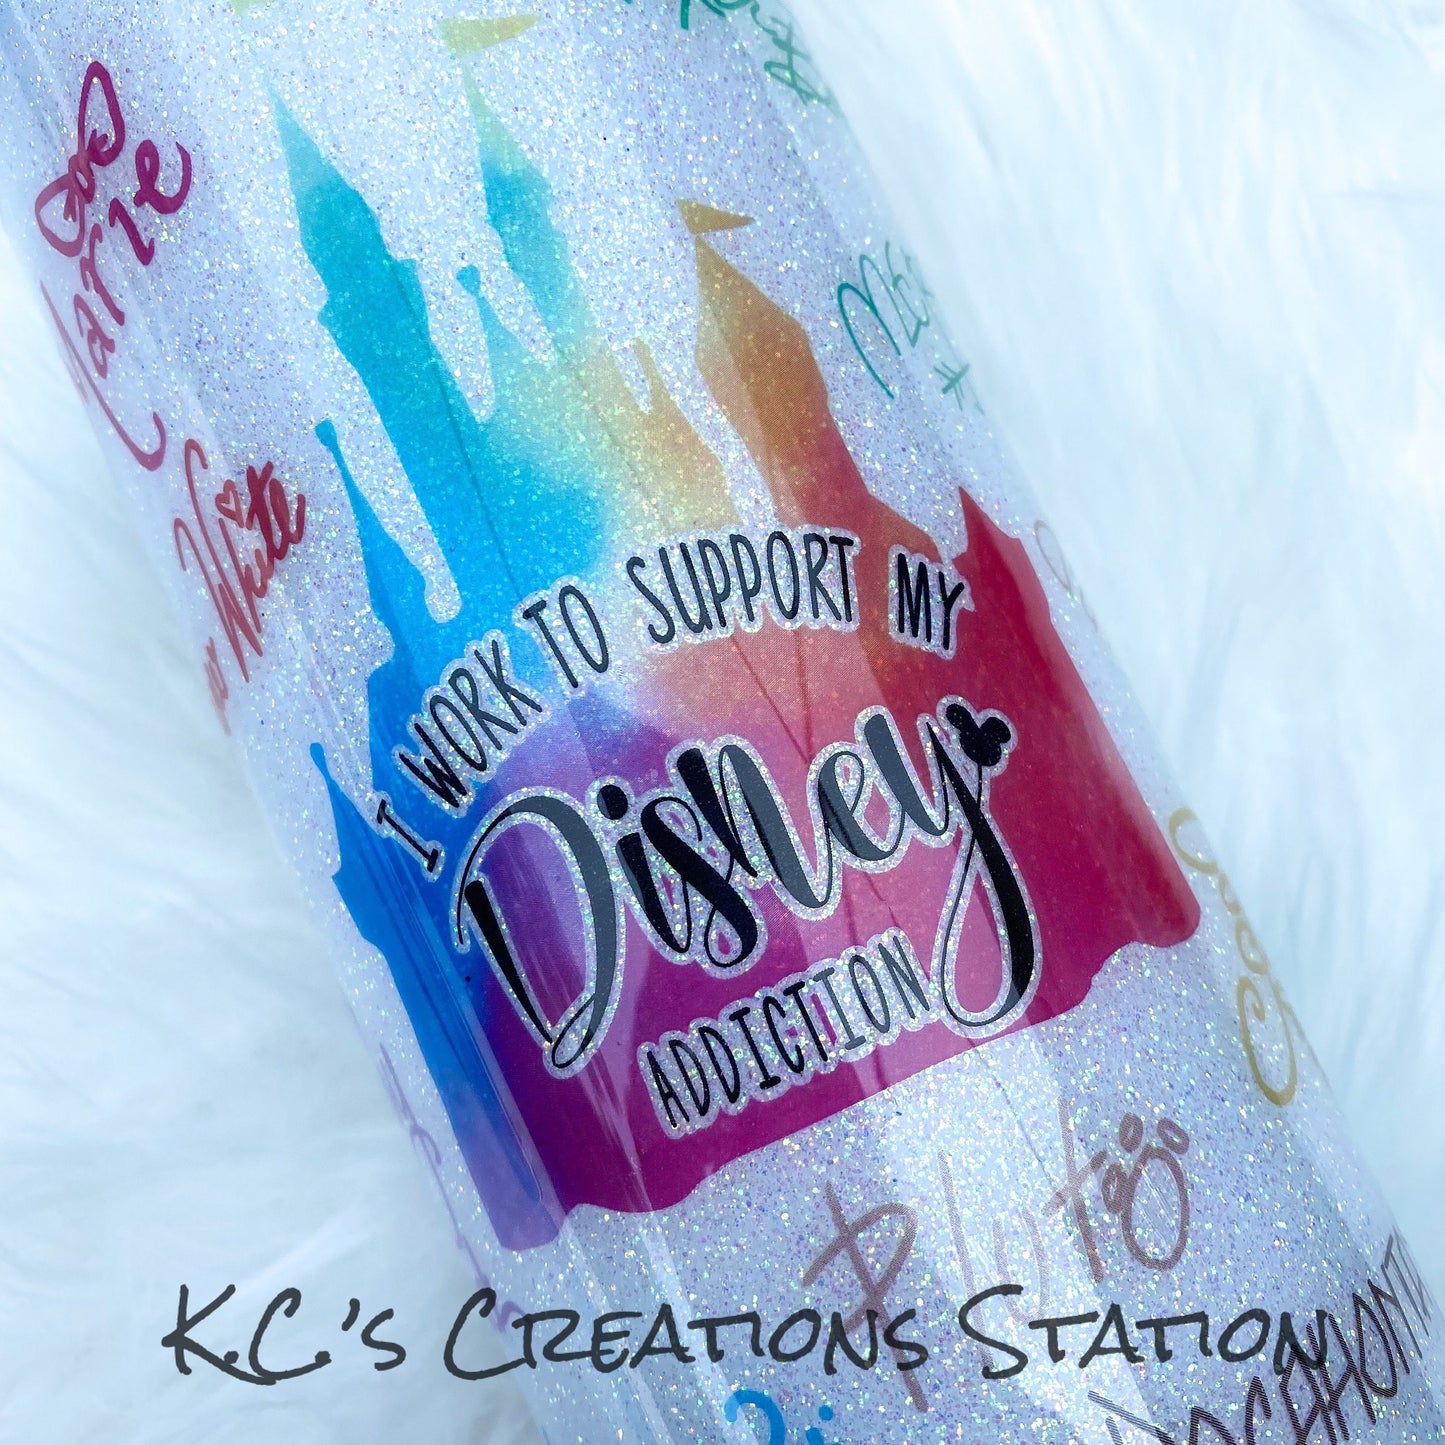 I work to support my Disney addiction glitter tumbler, funny Disney inspired glitter tumbler, Happiest place on earth, vacation tumbler,